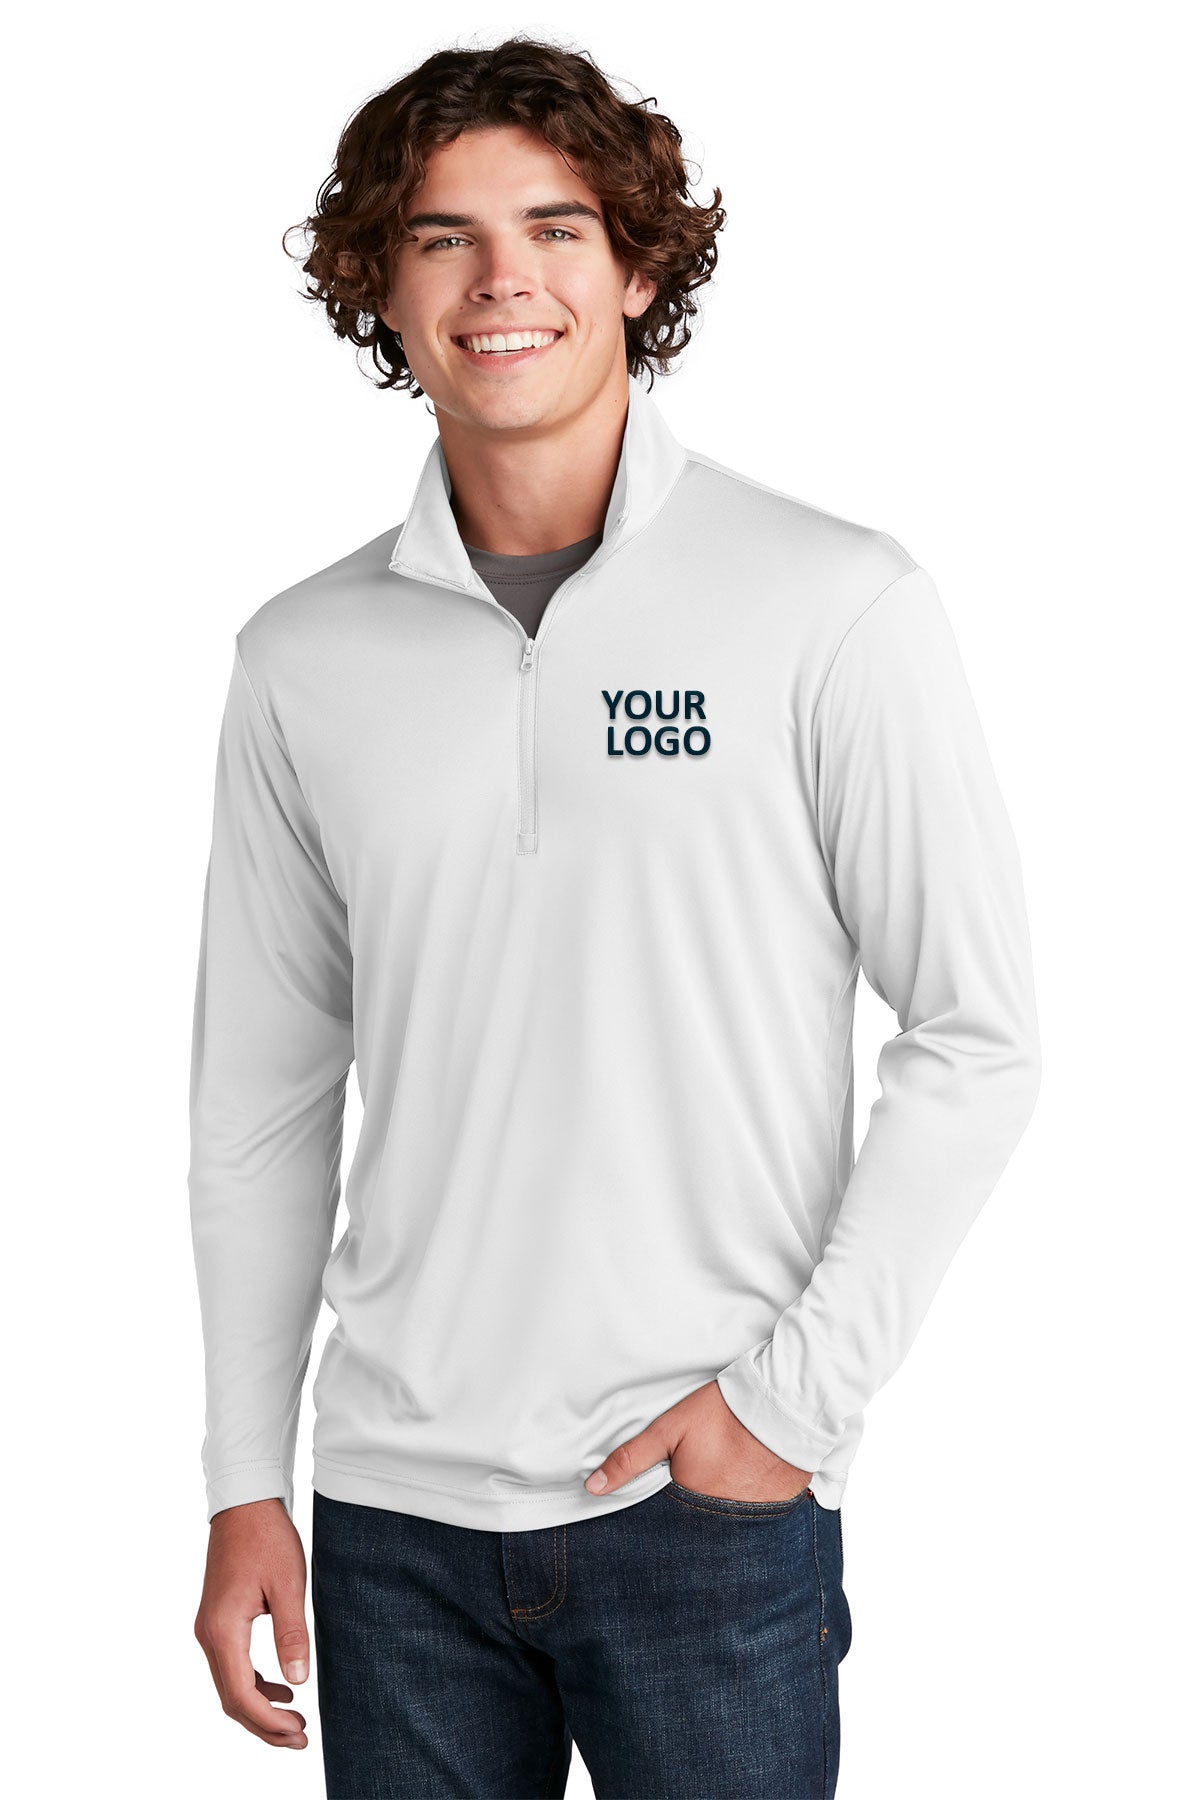 Sport-Tek PosiCharge Competitor Branded 1/4-Zip Pullovers, White